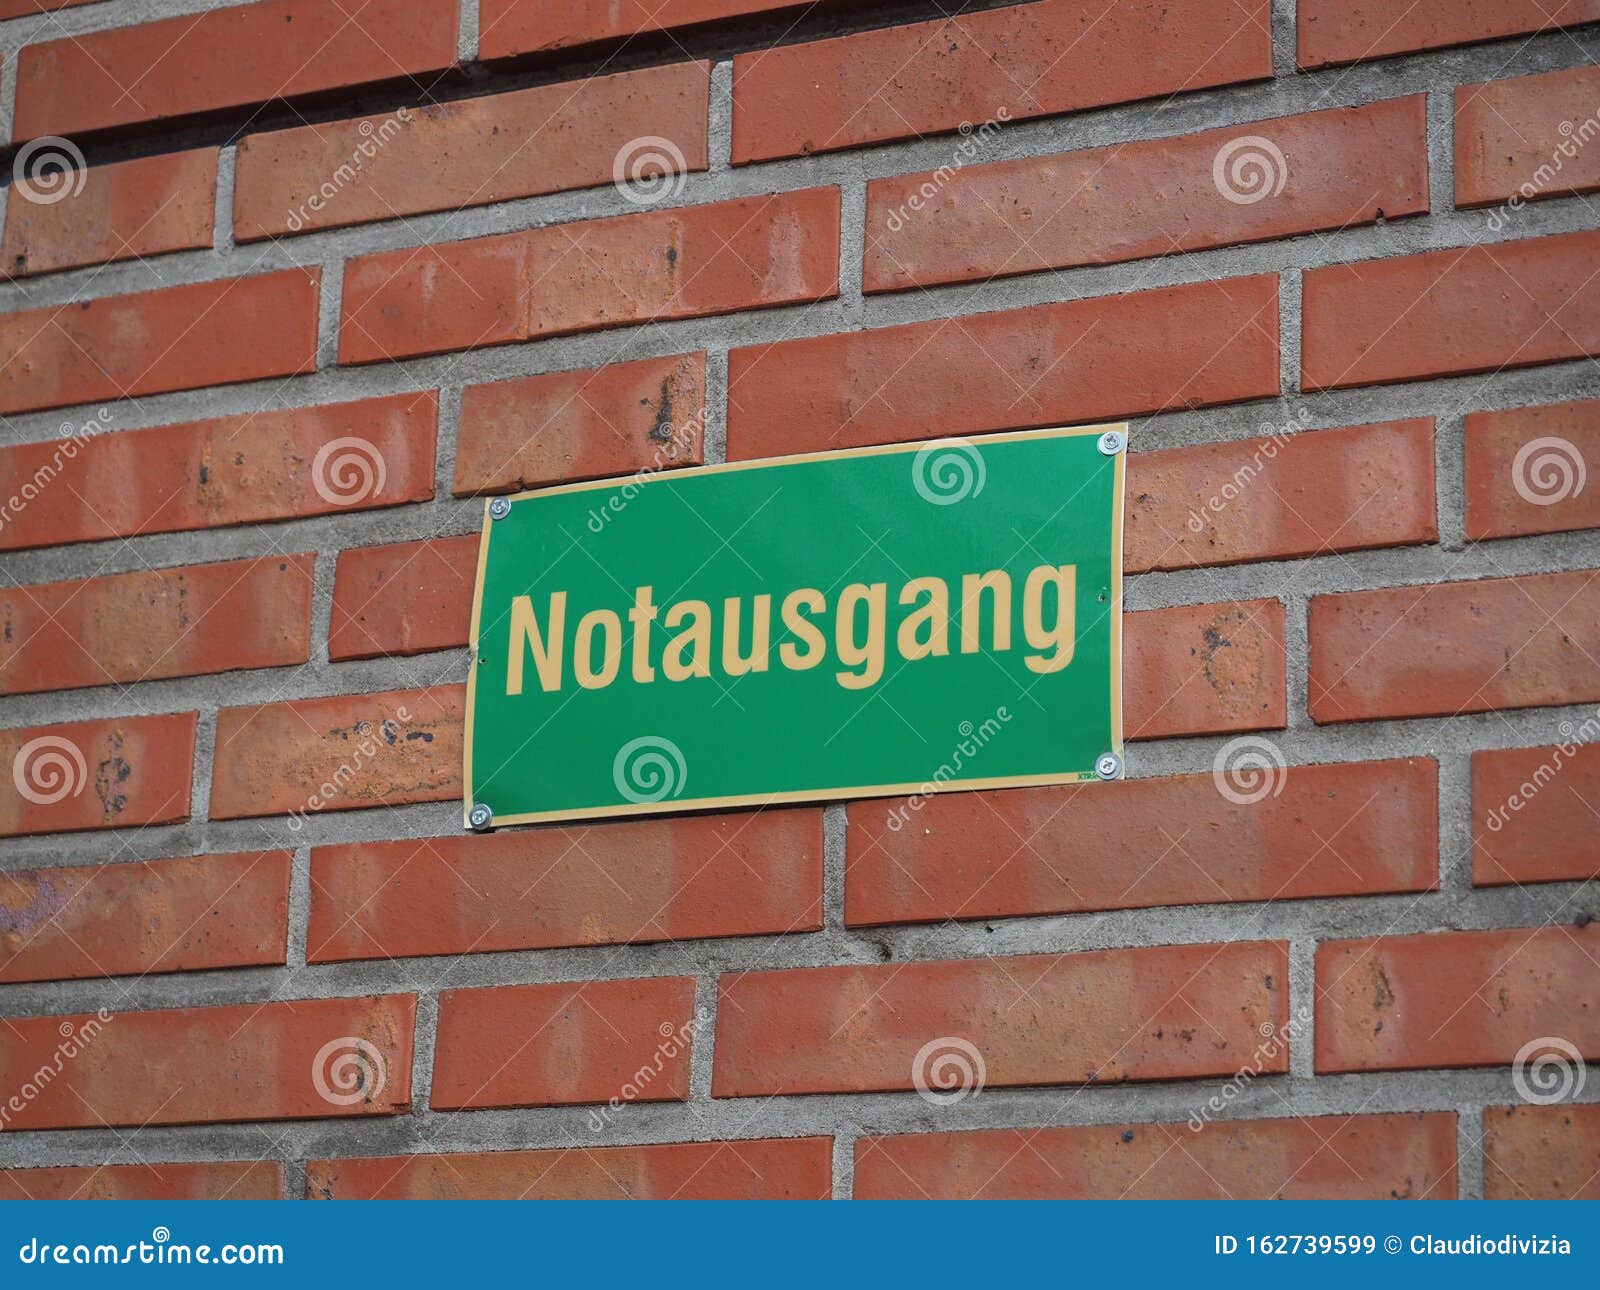 notausgang-emergency-exit-sign-stock-image-image-of-europe-wall